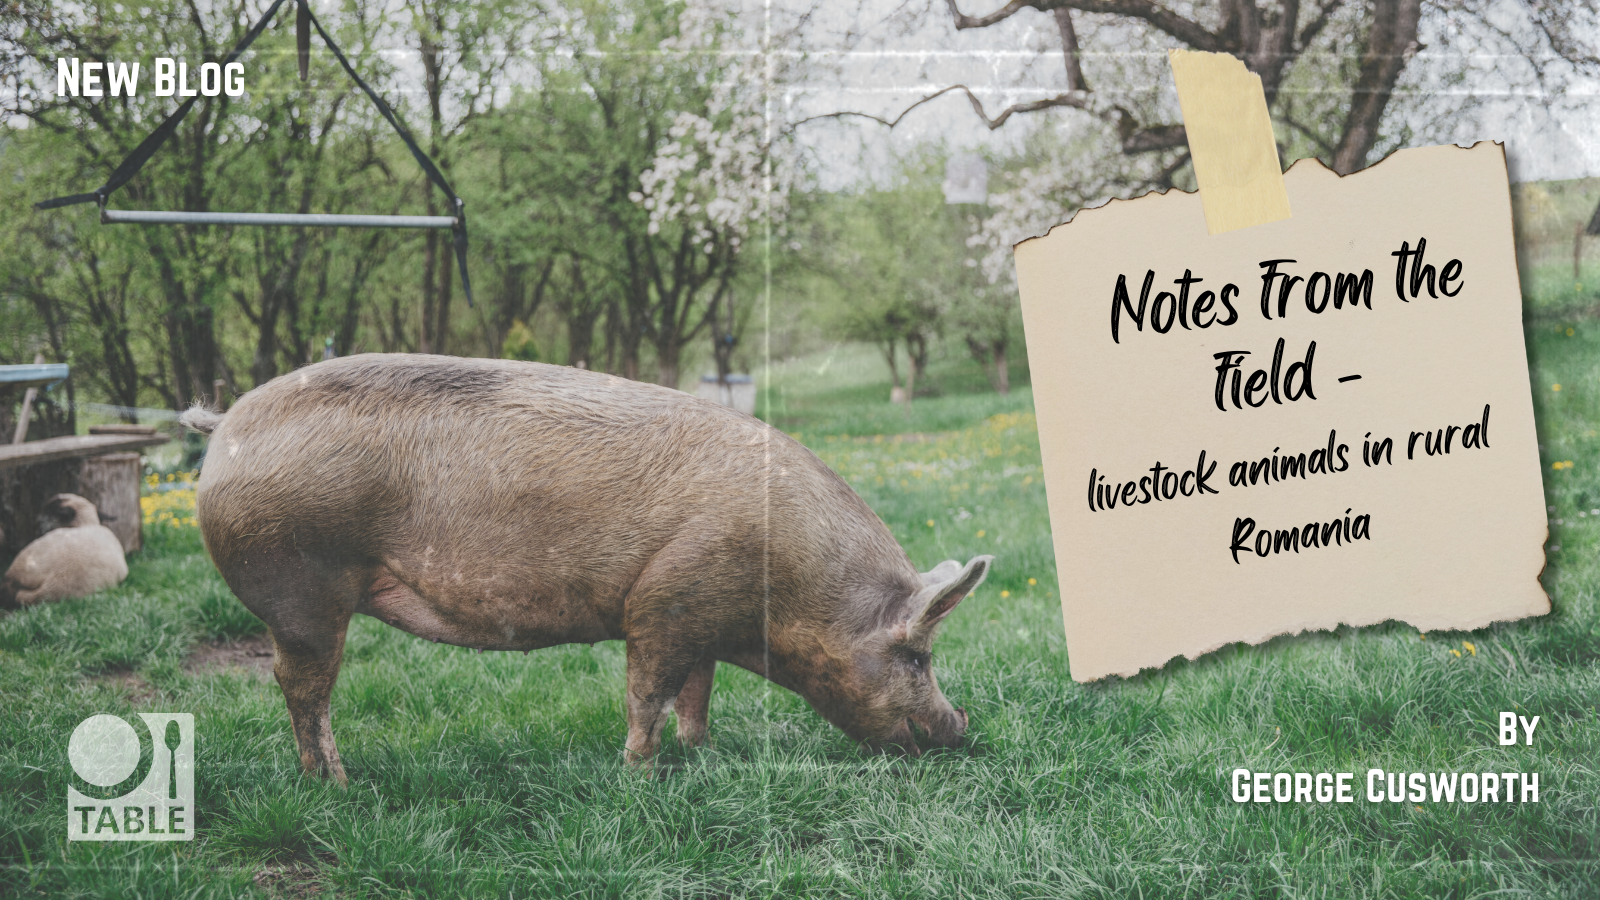 A flyer advertising a new blog by George Cusworth called "Notes from the Field - livestock animals in rural Romania." The background image is a photograph of a pig grazing in an agroforestry system in Romania. The TABLE logo is in the corner of the flyer.